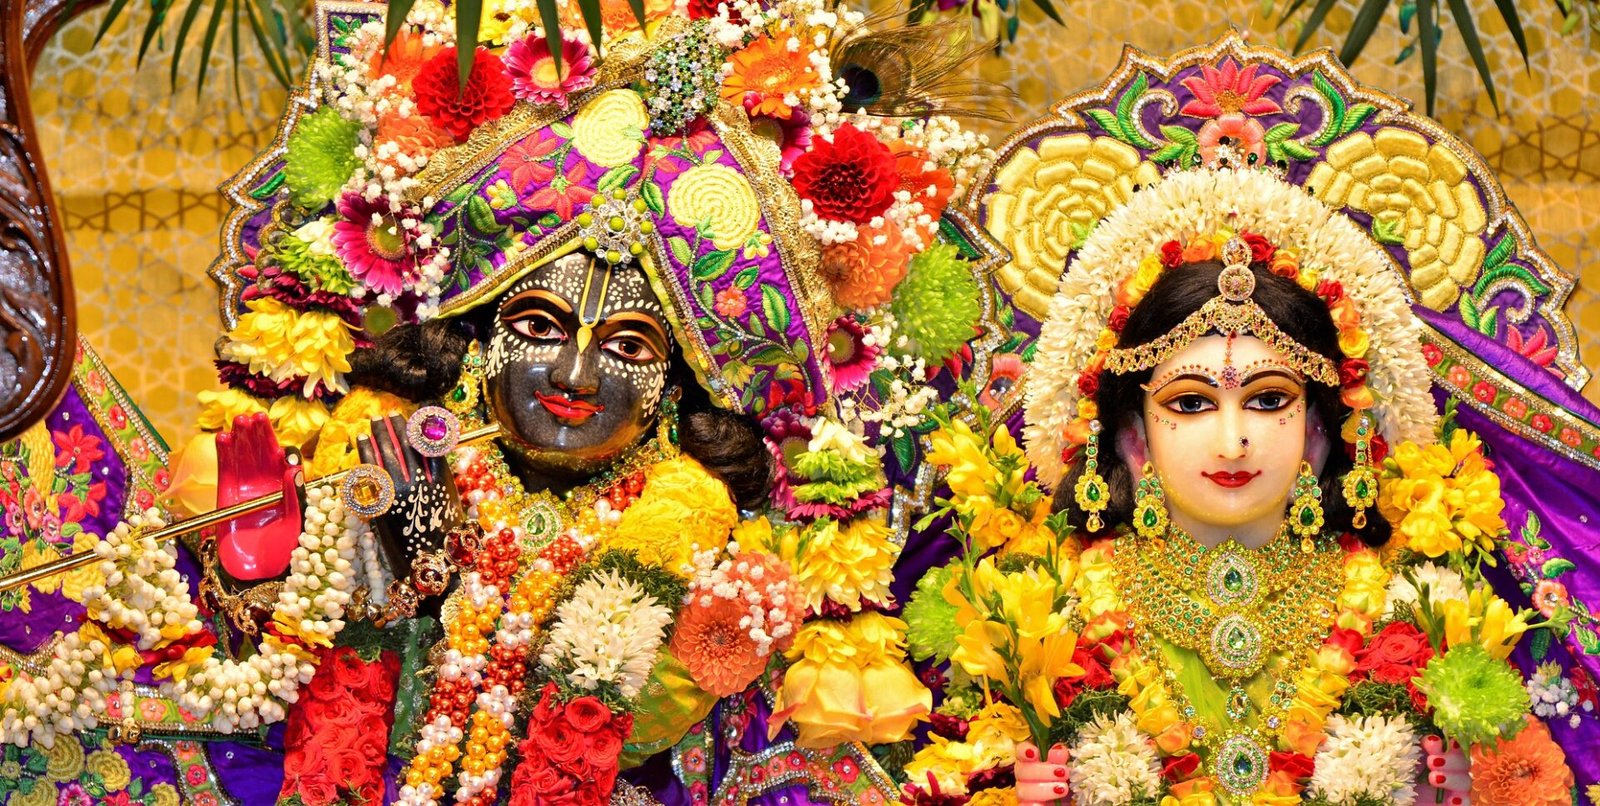 FACTS ABOUT LORD KRISHNA